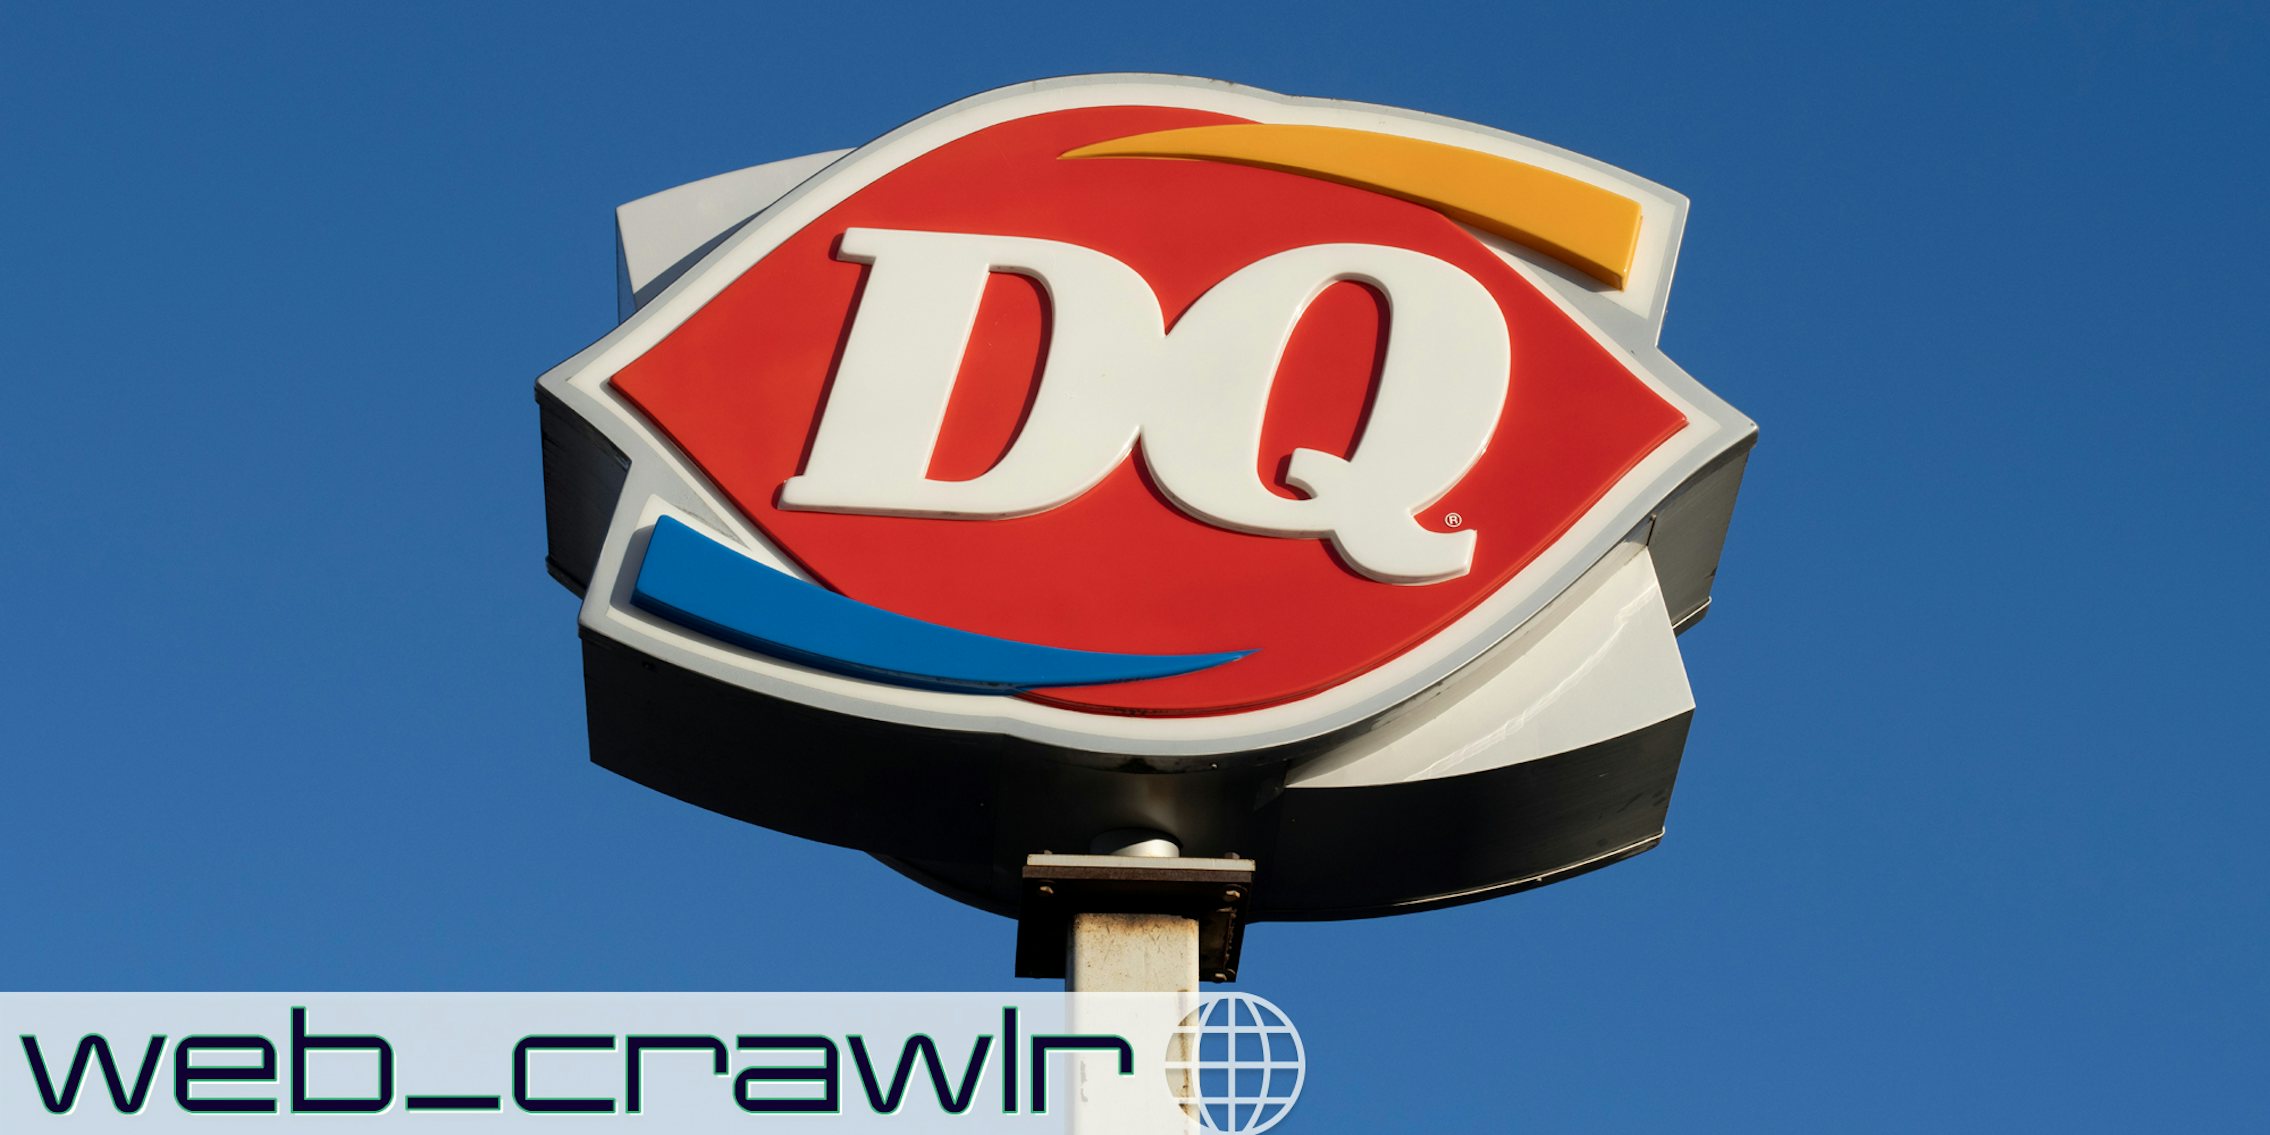 A Dairy Queen sign. The Daily Dot newsletter web_crawlr logo is in the bottom left corner.